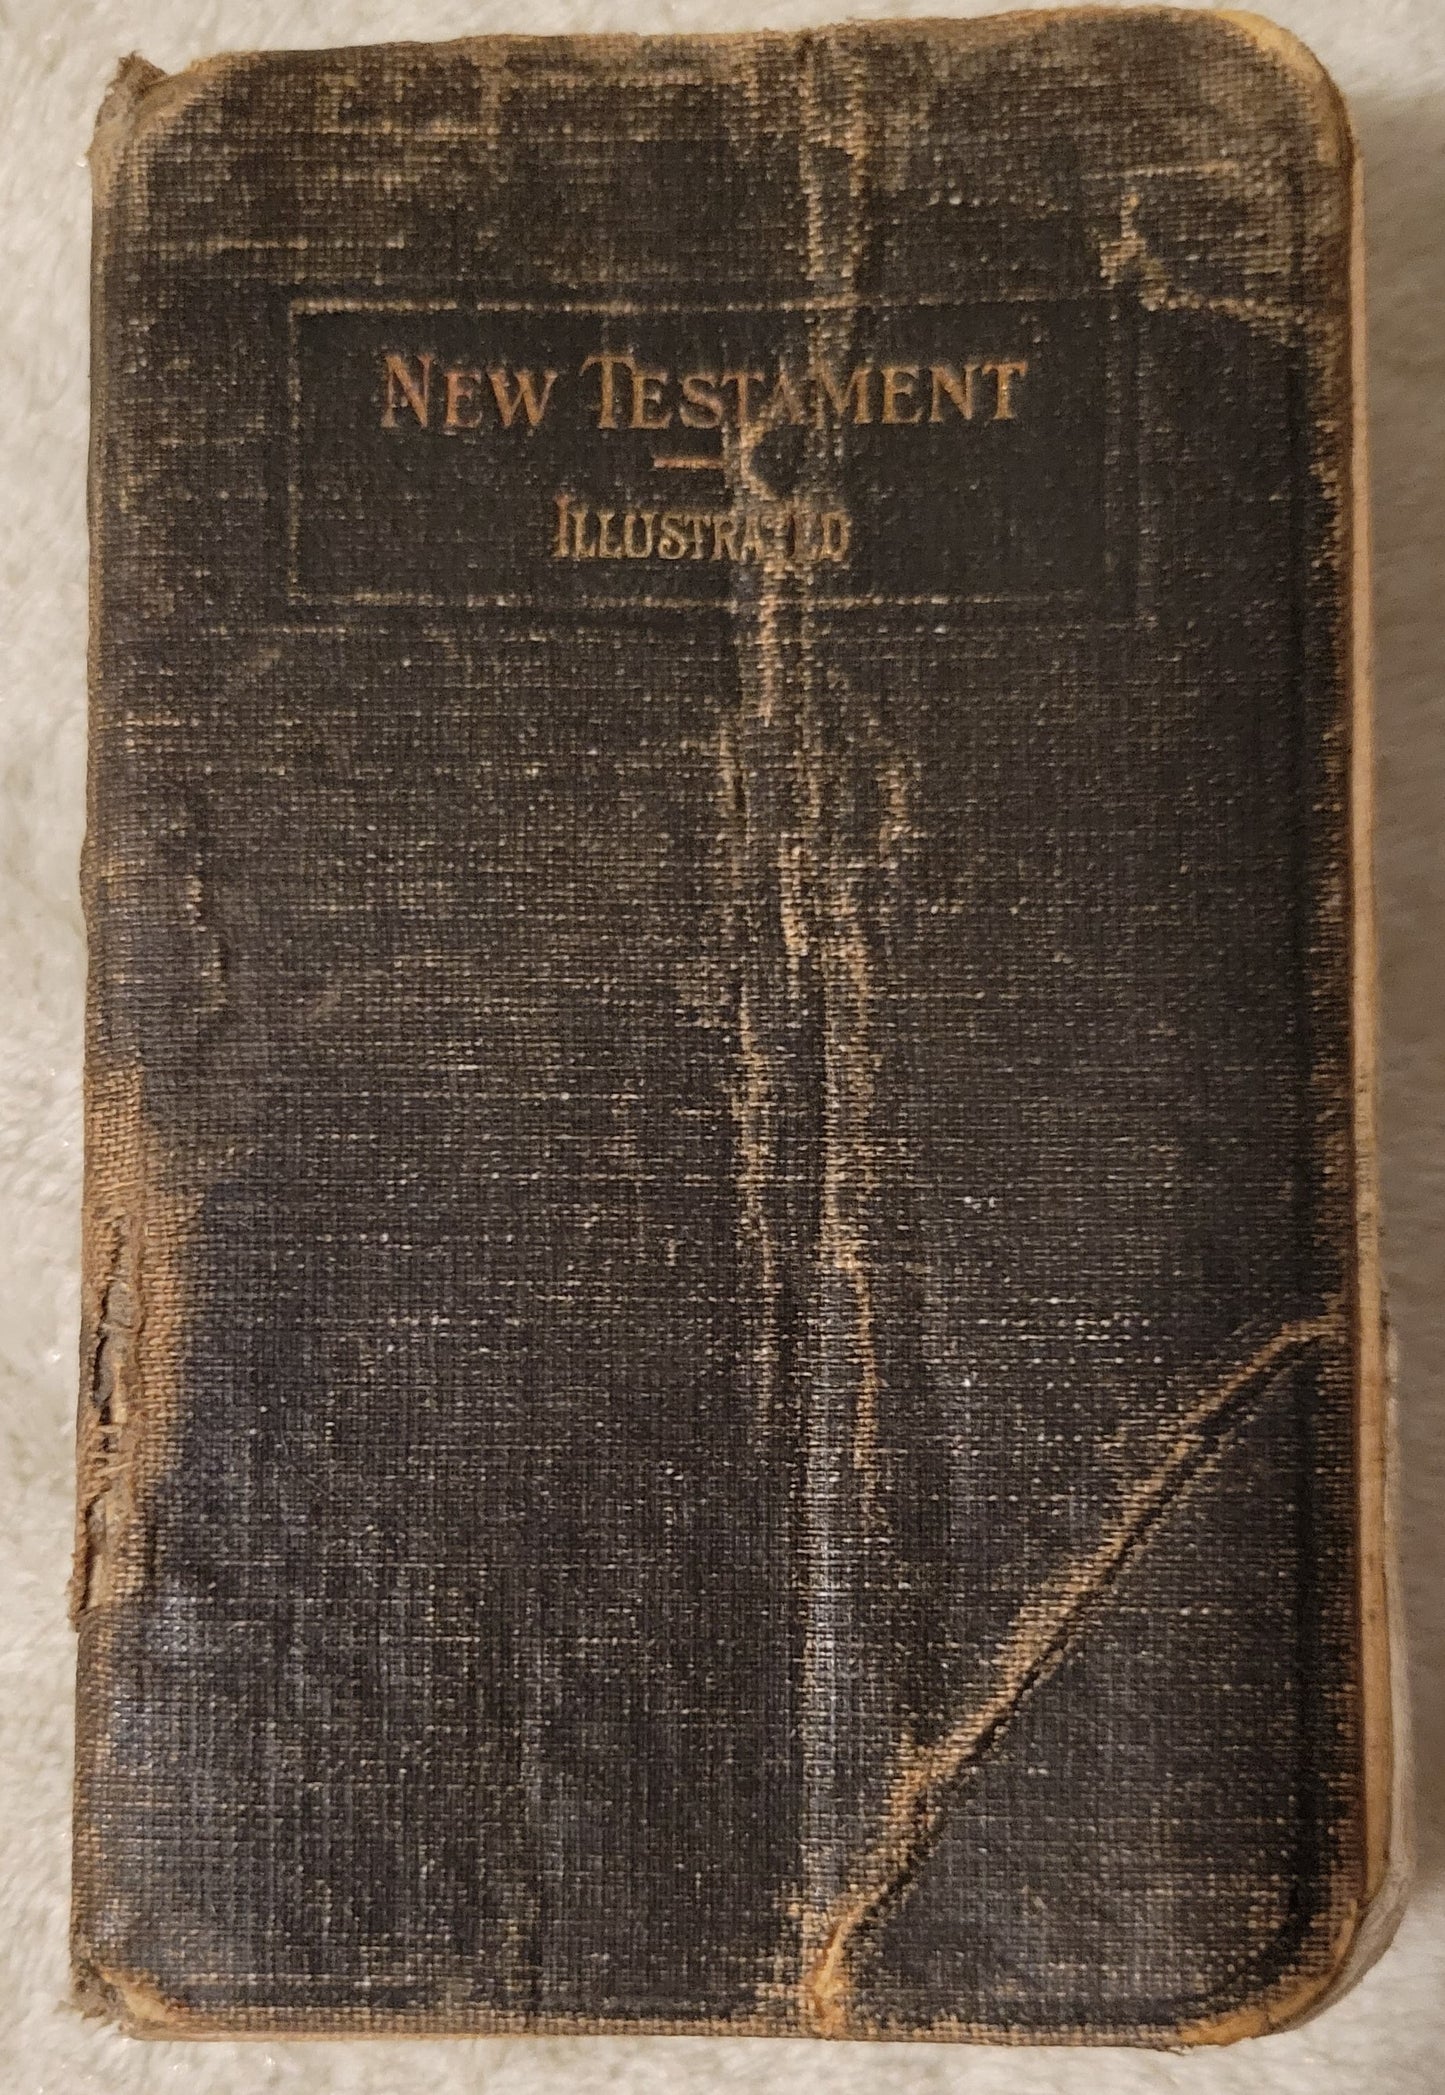 Antique book for sale, illustrated New Testament, 1918.  View of front cover.